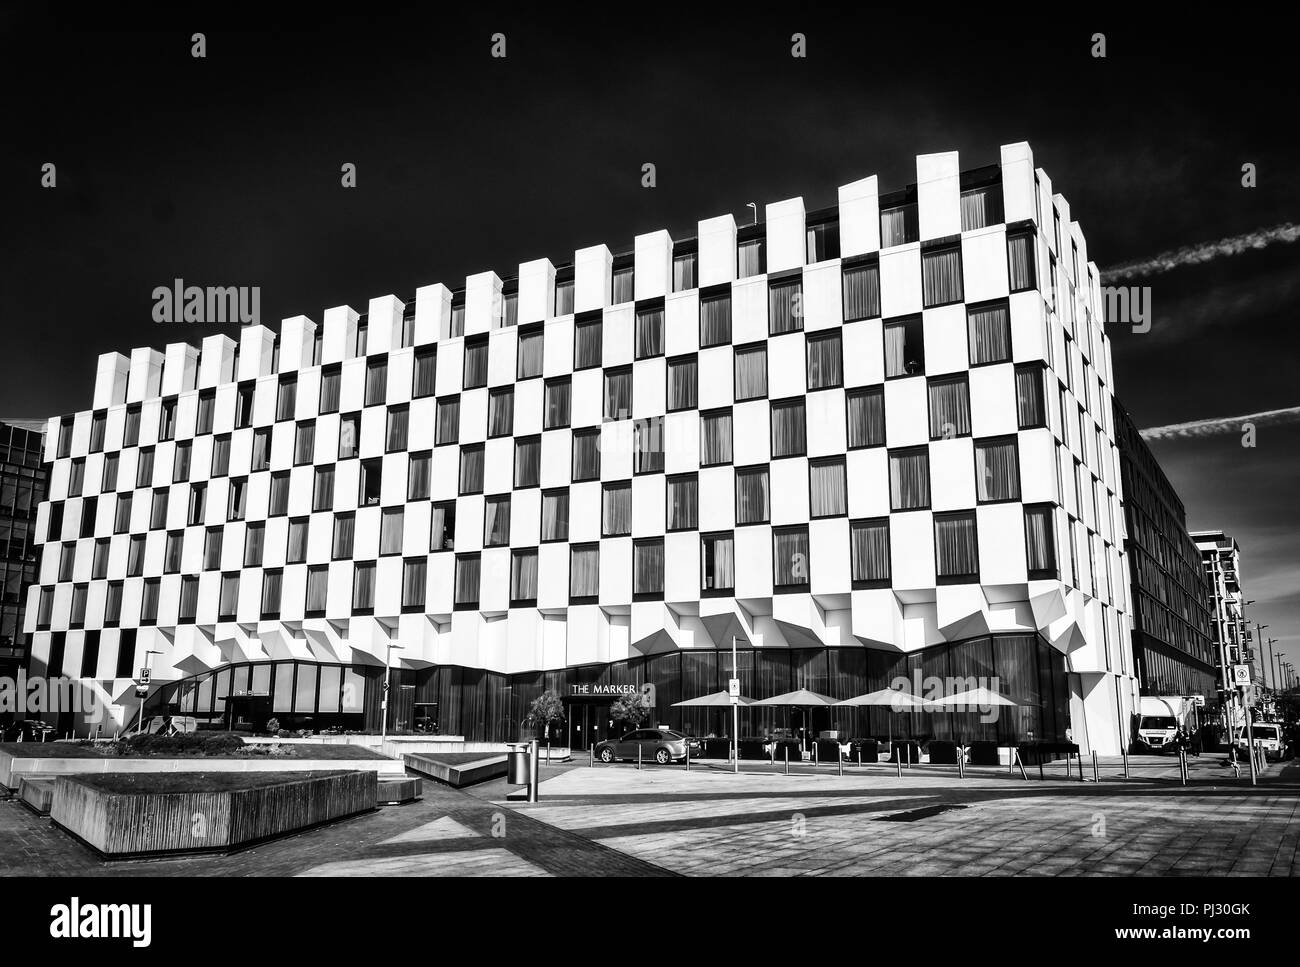 Dublin, Ireland, March 2018, The Maker hotel with its chequerboard facade in Grand Canal square Stock Photo